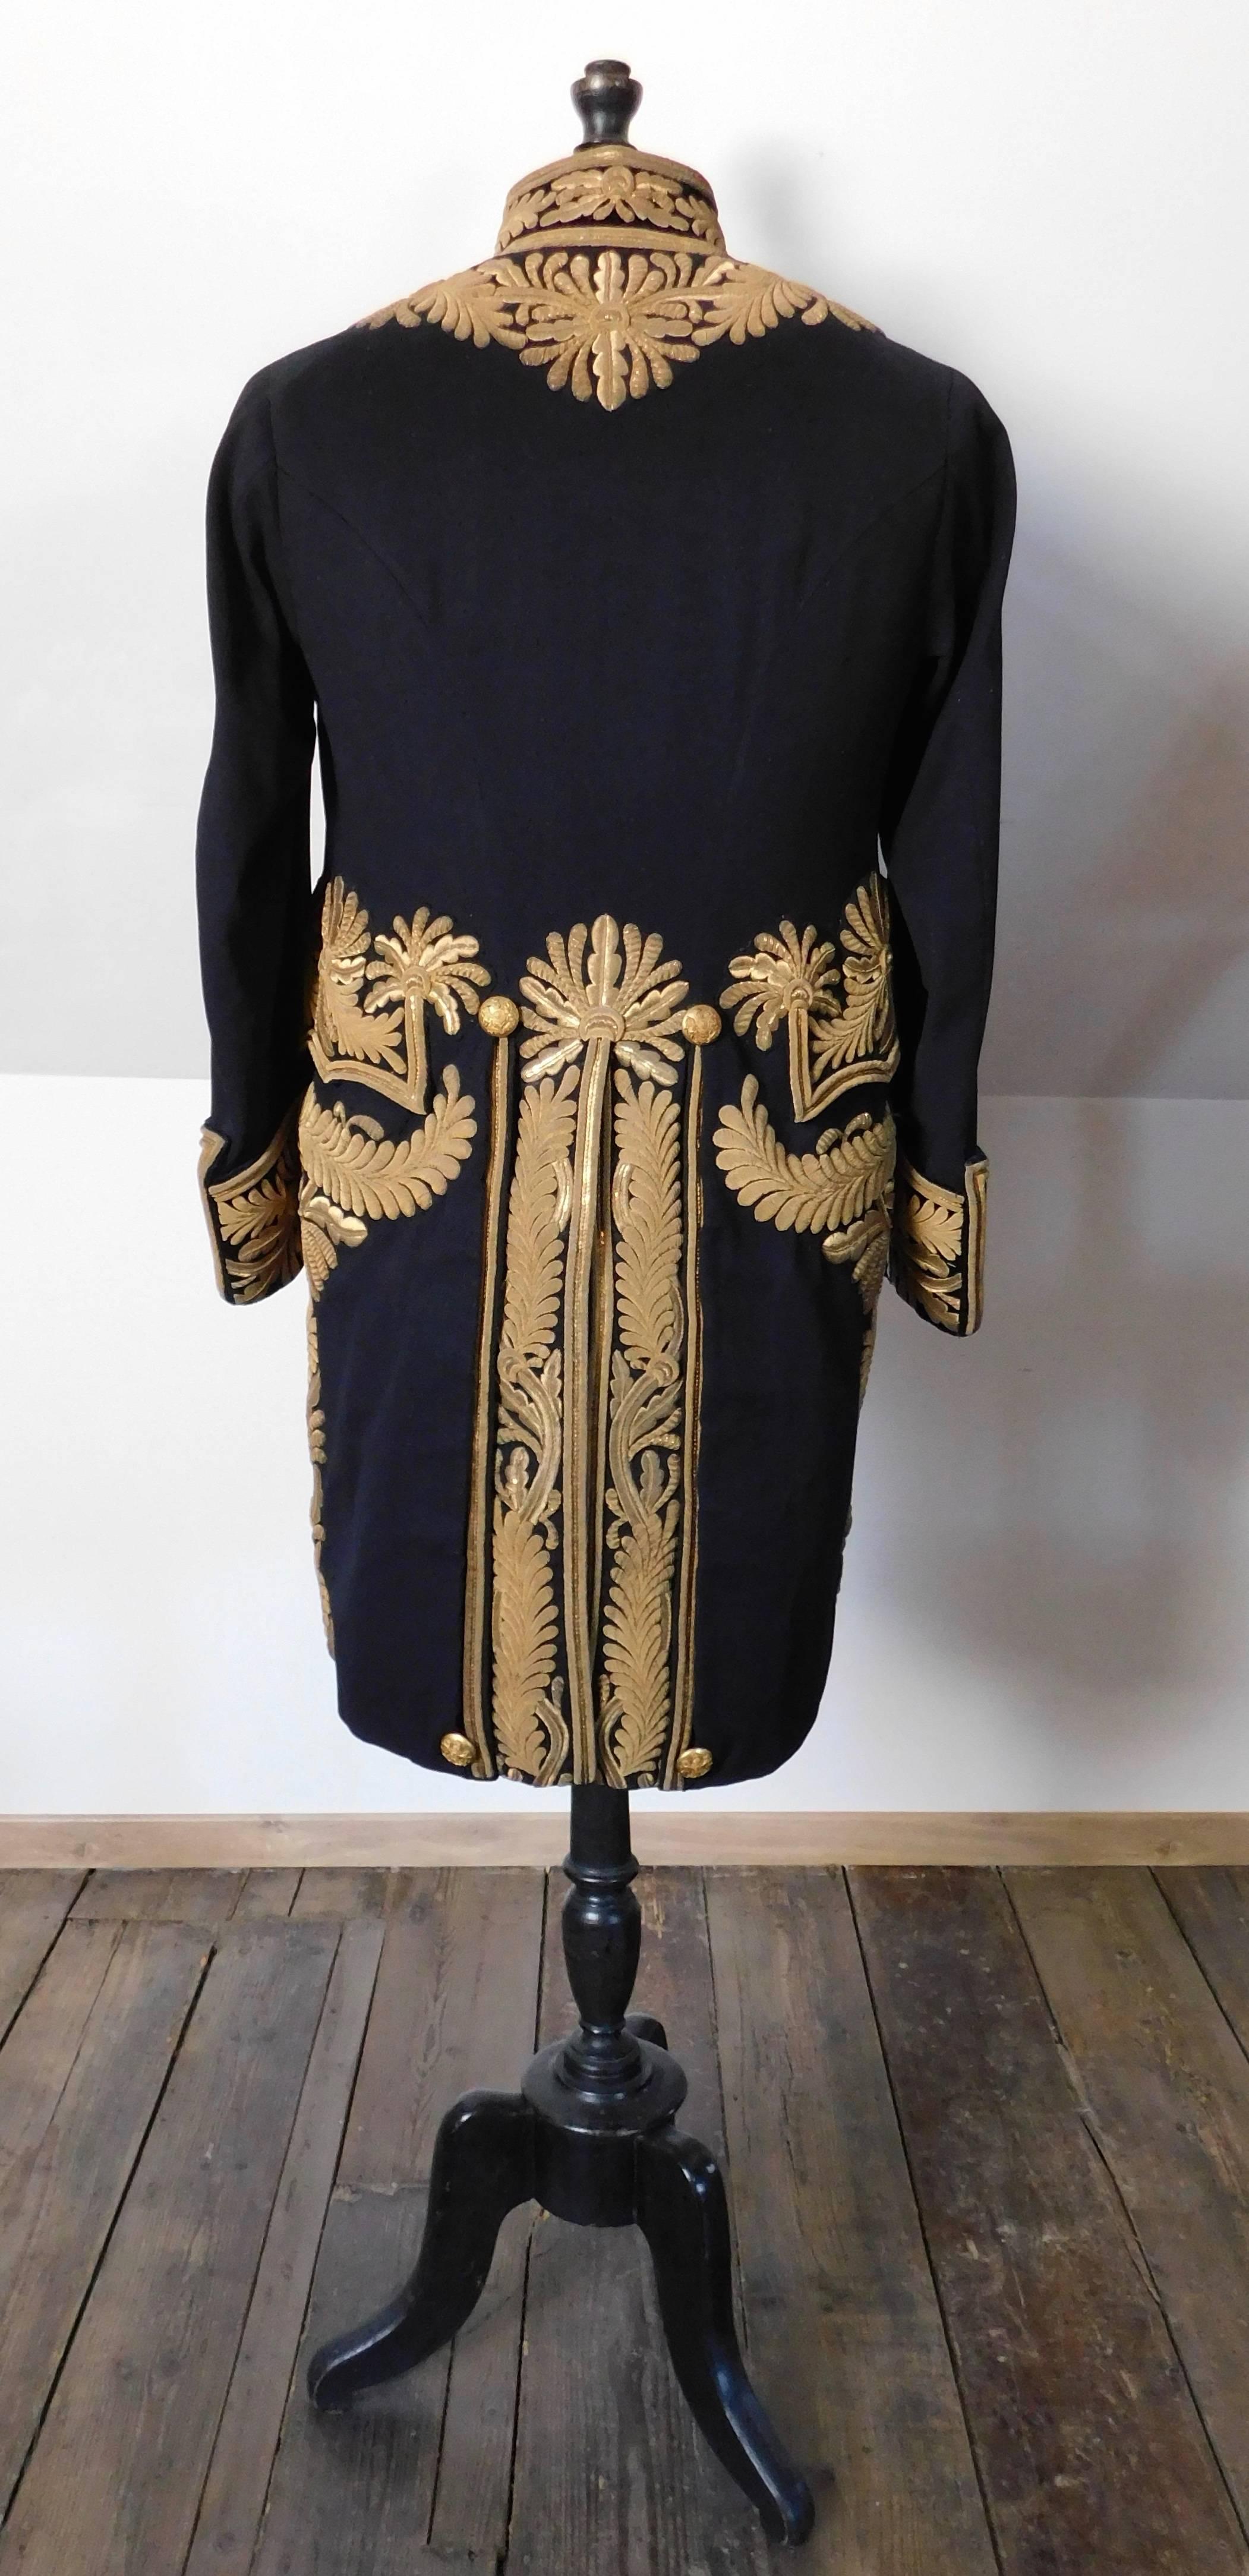 19th century fine black wool tailcoat decorated overall with heavy raised work gold bullion foliage embroidery. Original gilt brass buttons bearing the Royal Coat of Arms (with lion and unicorn) and hidden hook closures. The interior is lined in